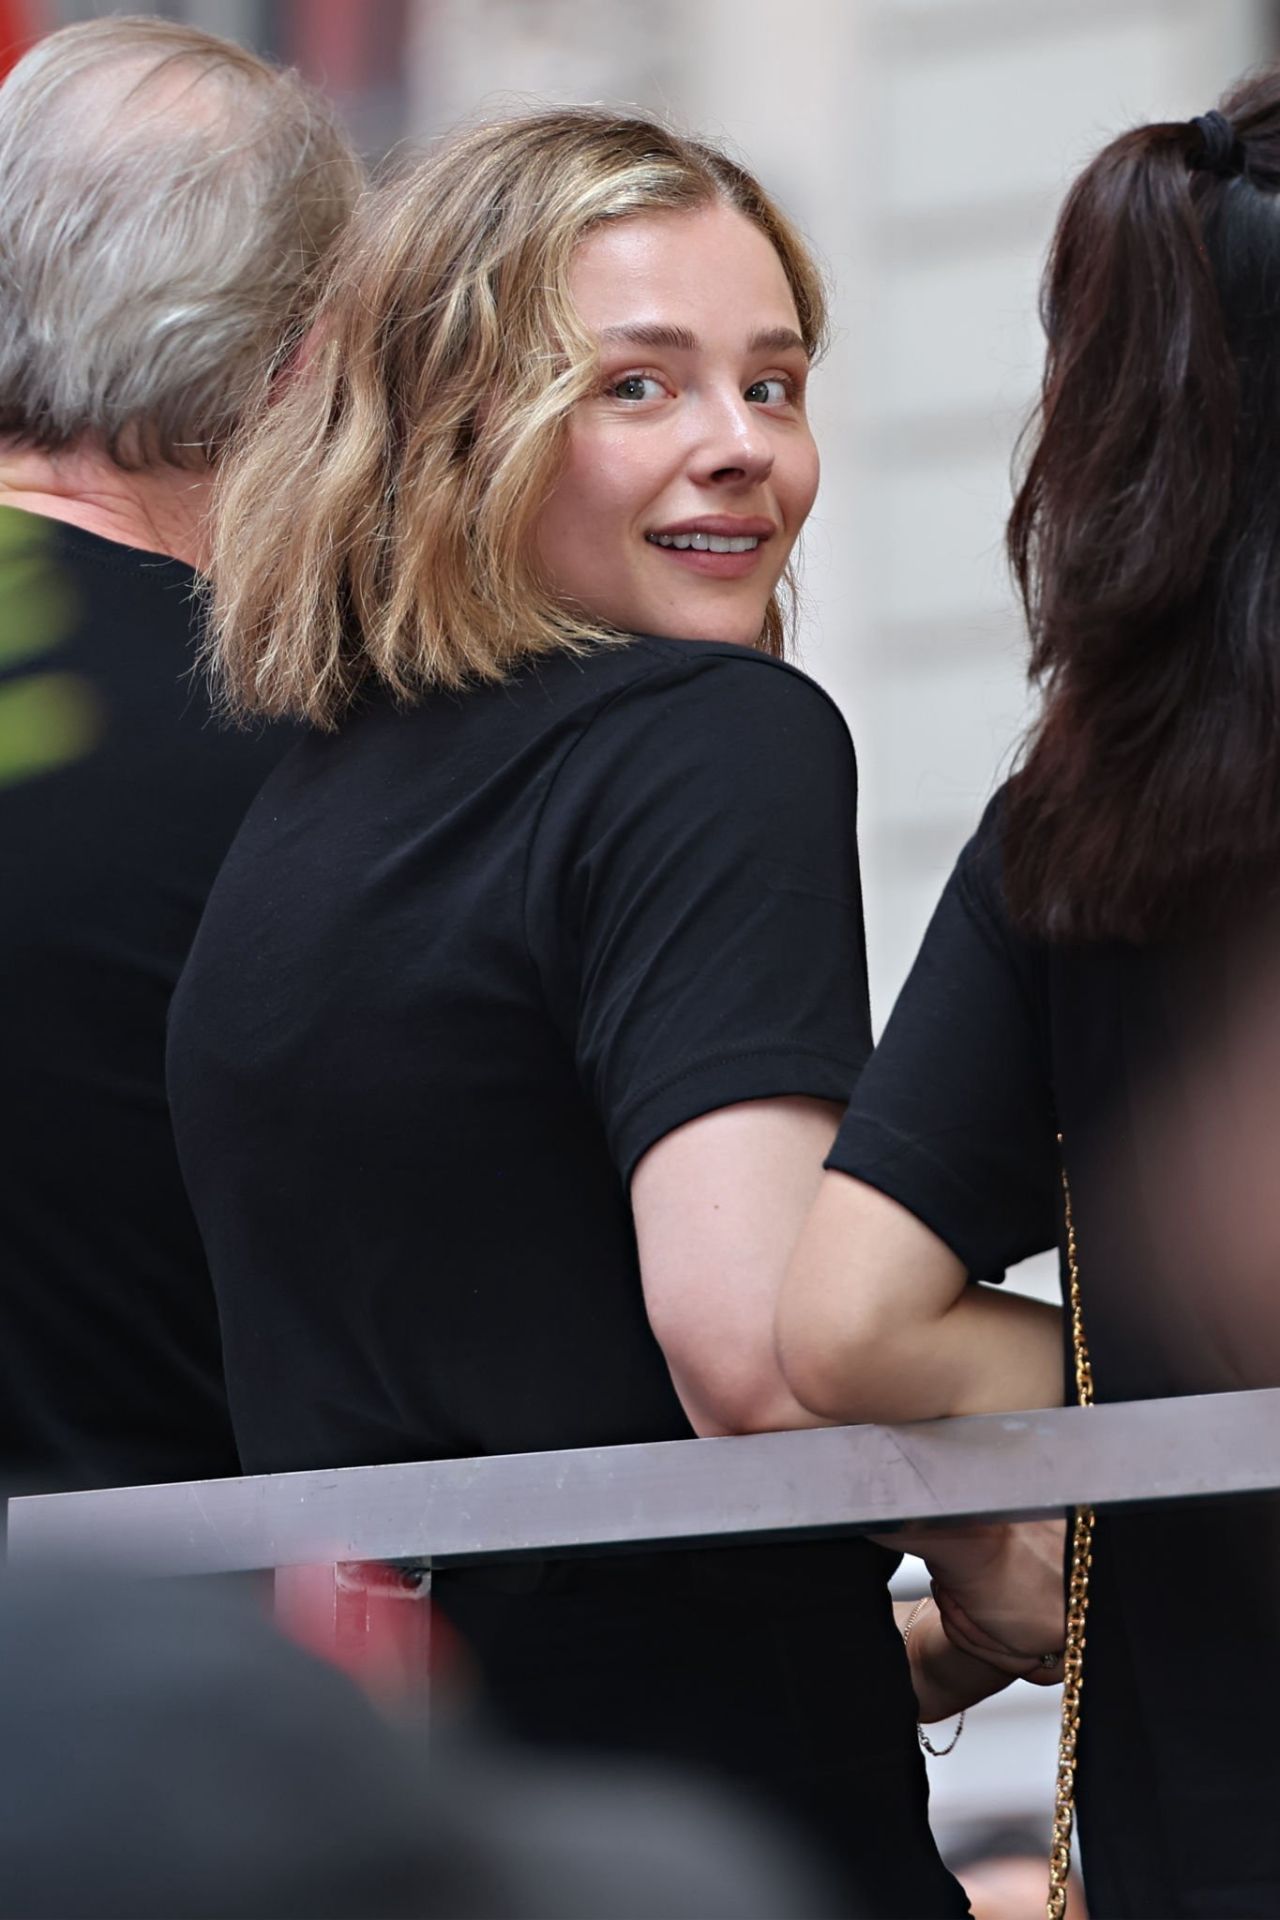 July 24, 2023, New York City, New York, USA: Actor CHLOE GRACE MORETZ seen  at SAG-AFTRA's ˜Rock the City for a Fair Contract' Rally held in Times  Square (Credit Image: © Nancy